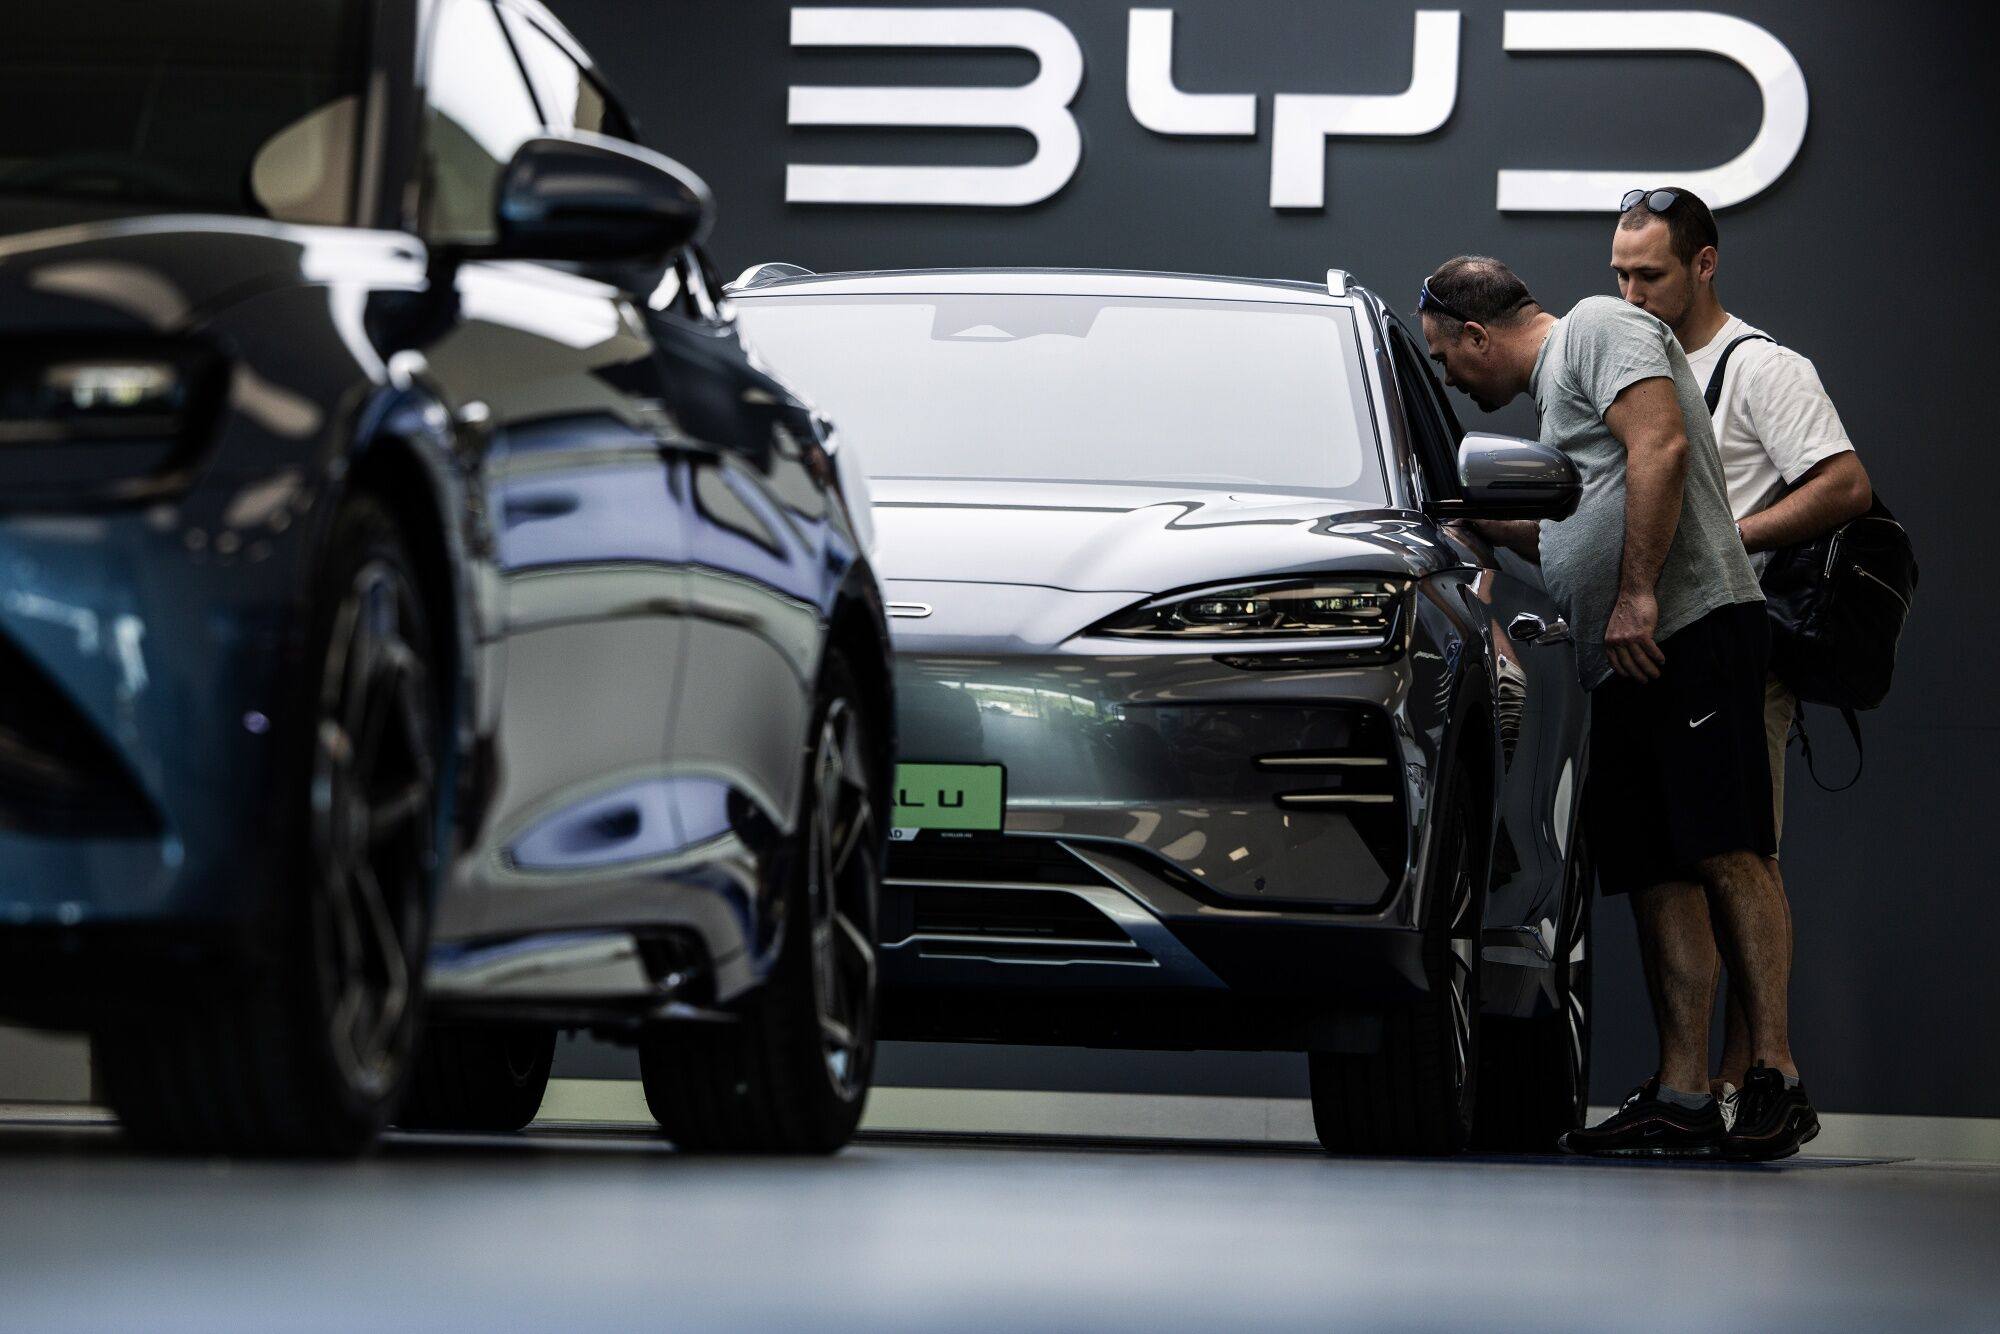 Customers check out BYD’s electric vehicles at a showroom in Budapest, Hungary on May 27. Photo: Bloomberg